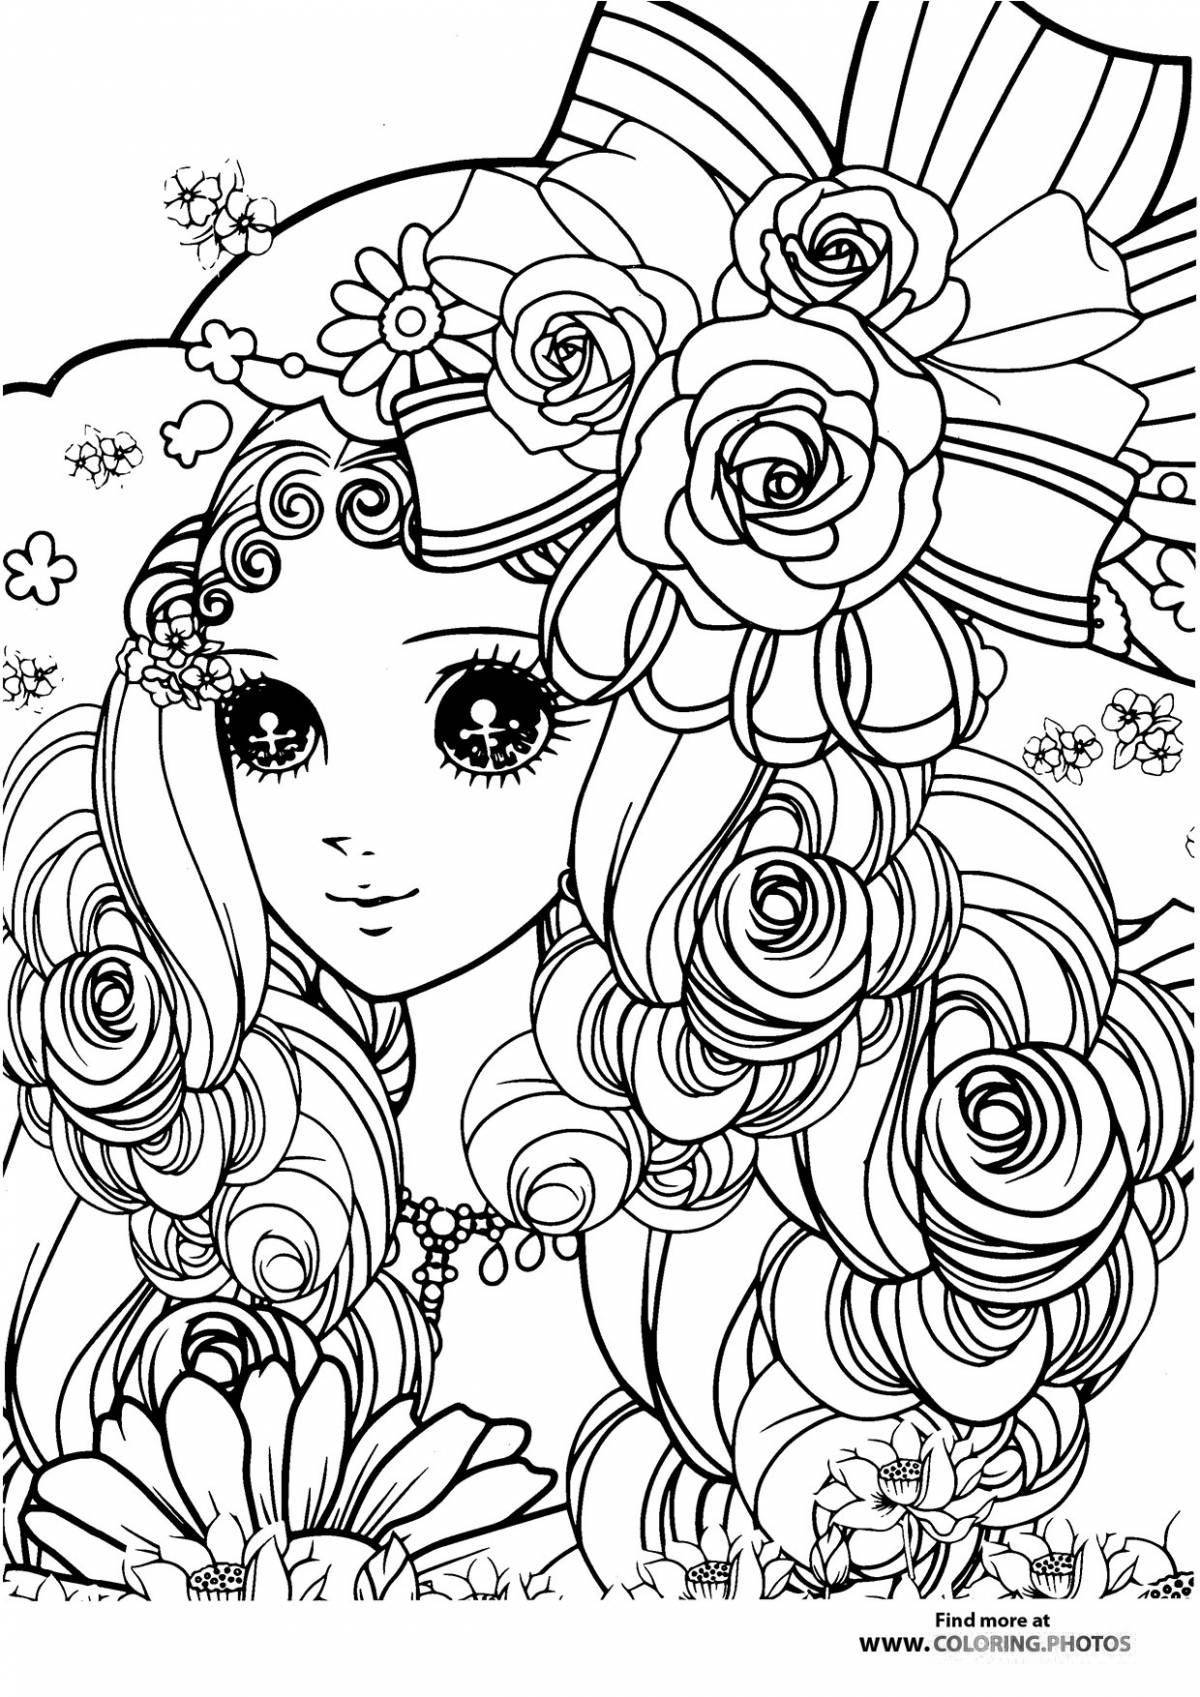 Colourful coloring for girls 18 years old